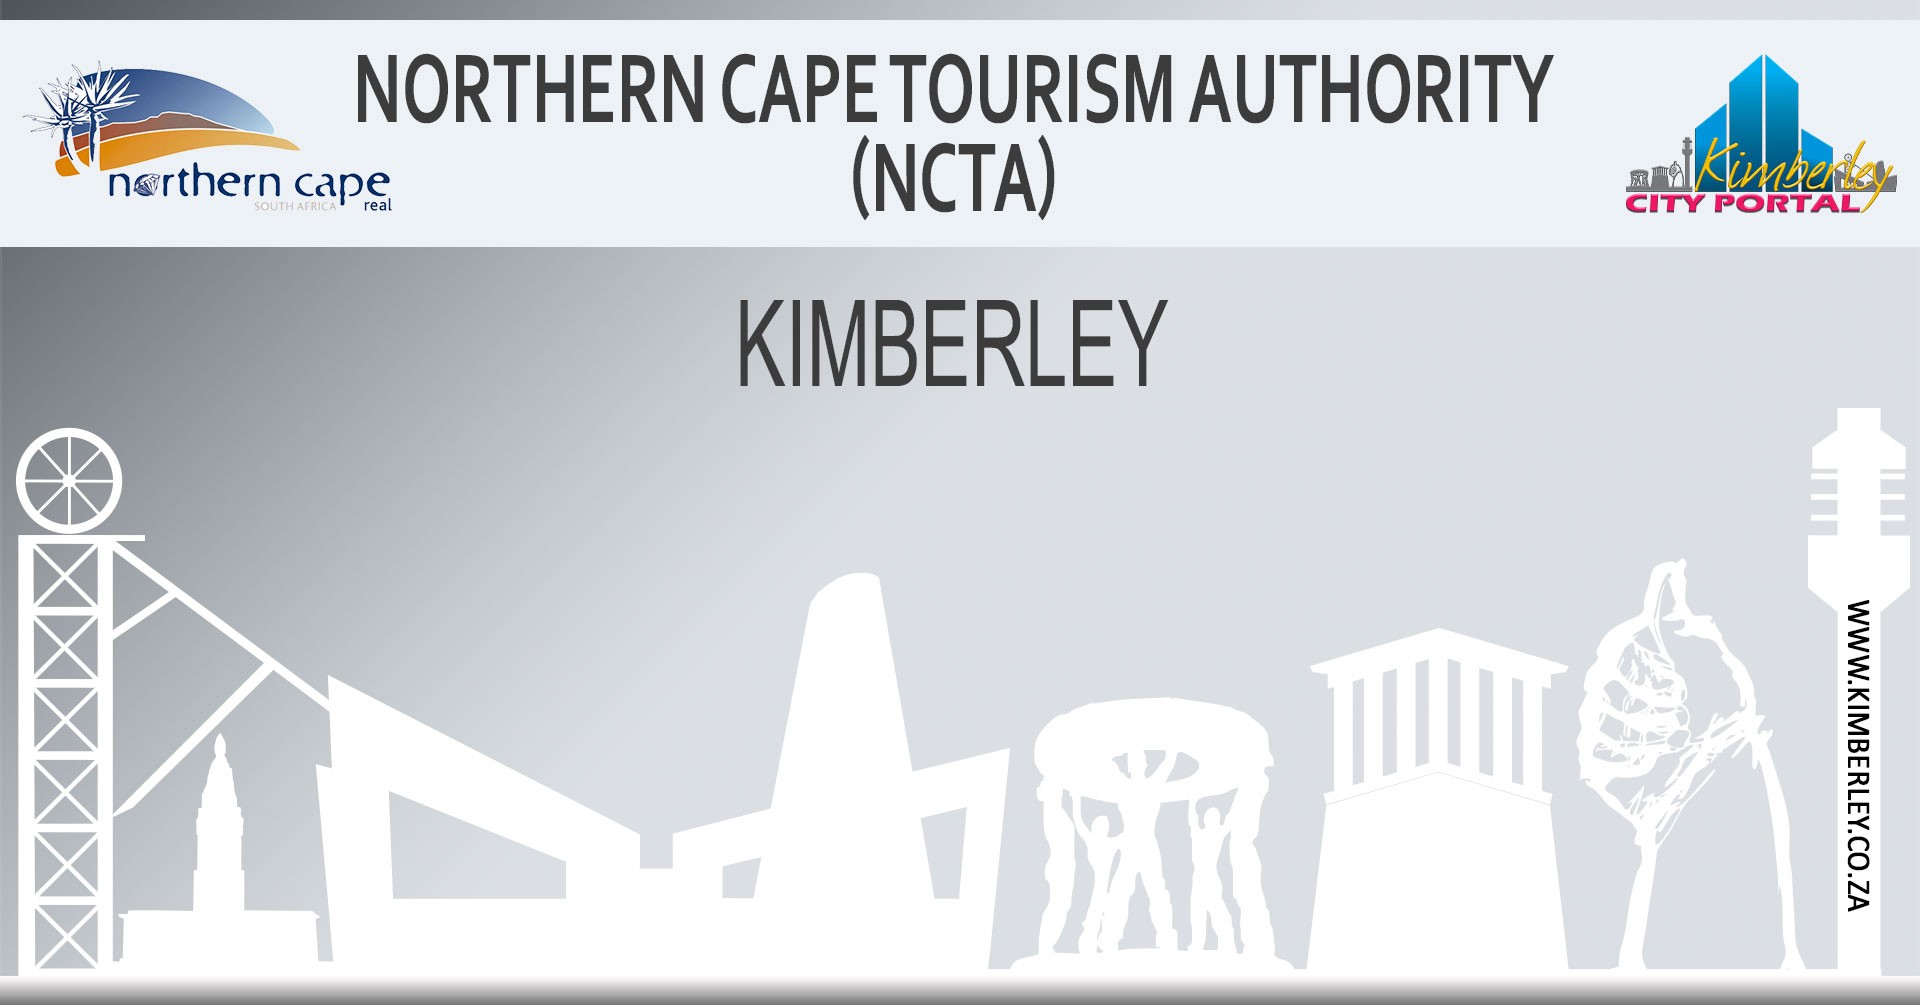 northern cape tourism department